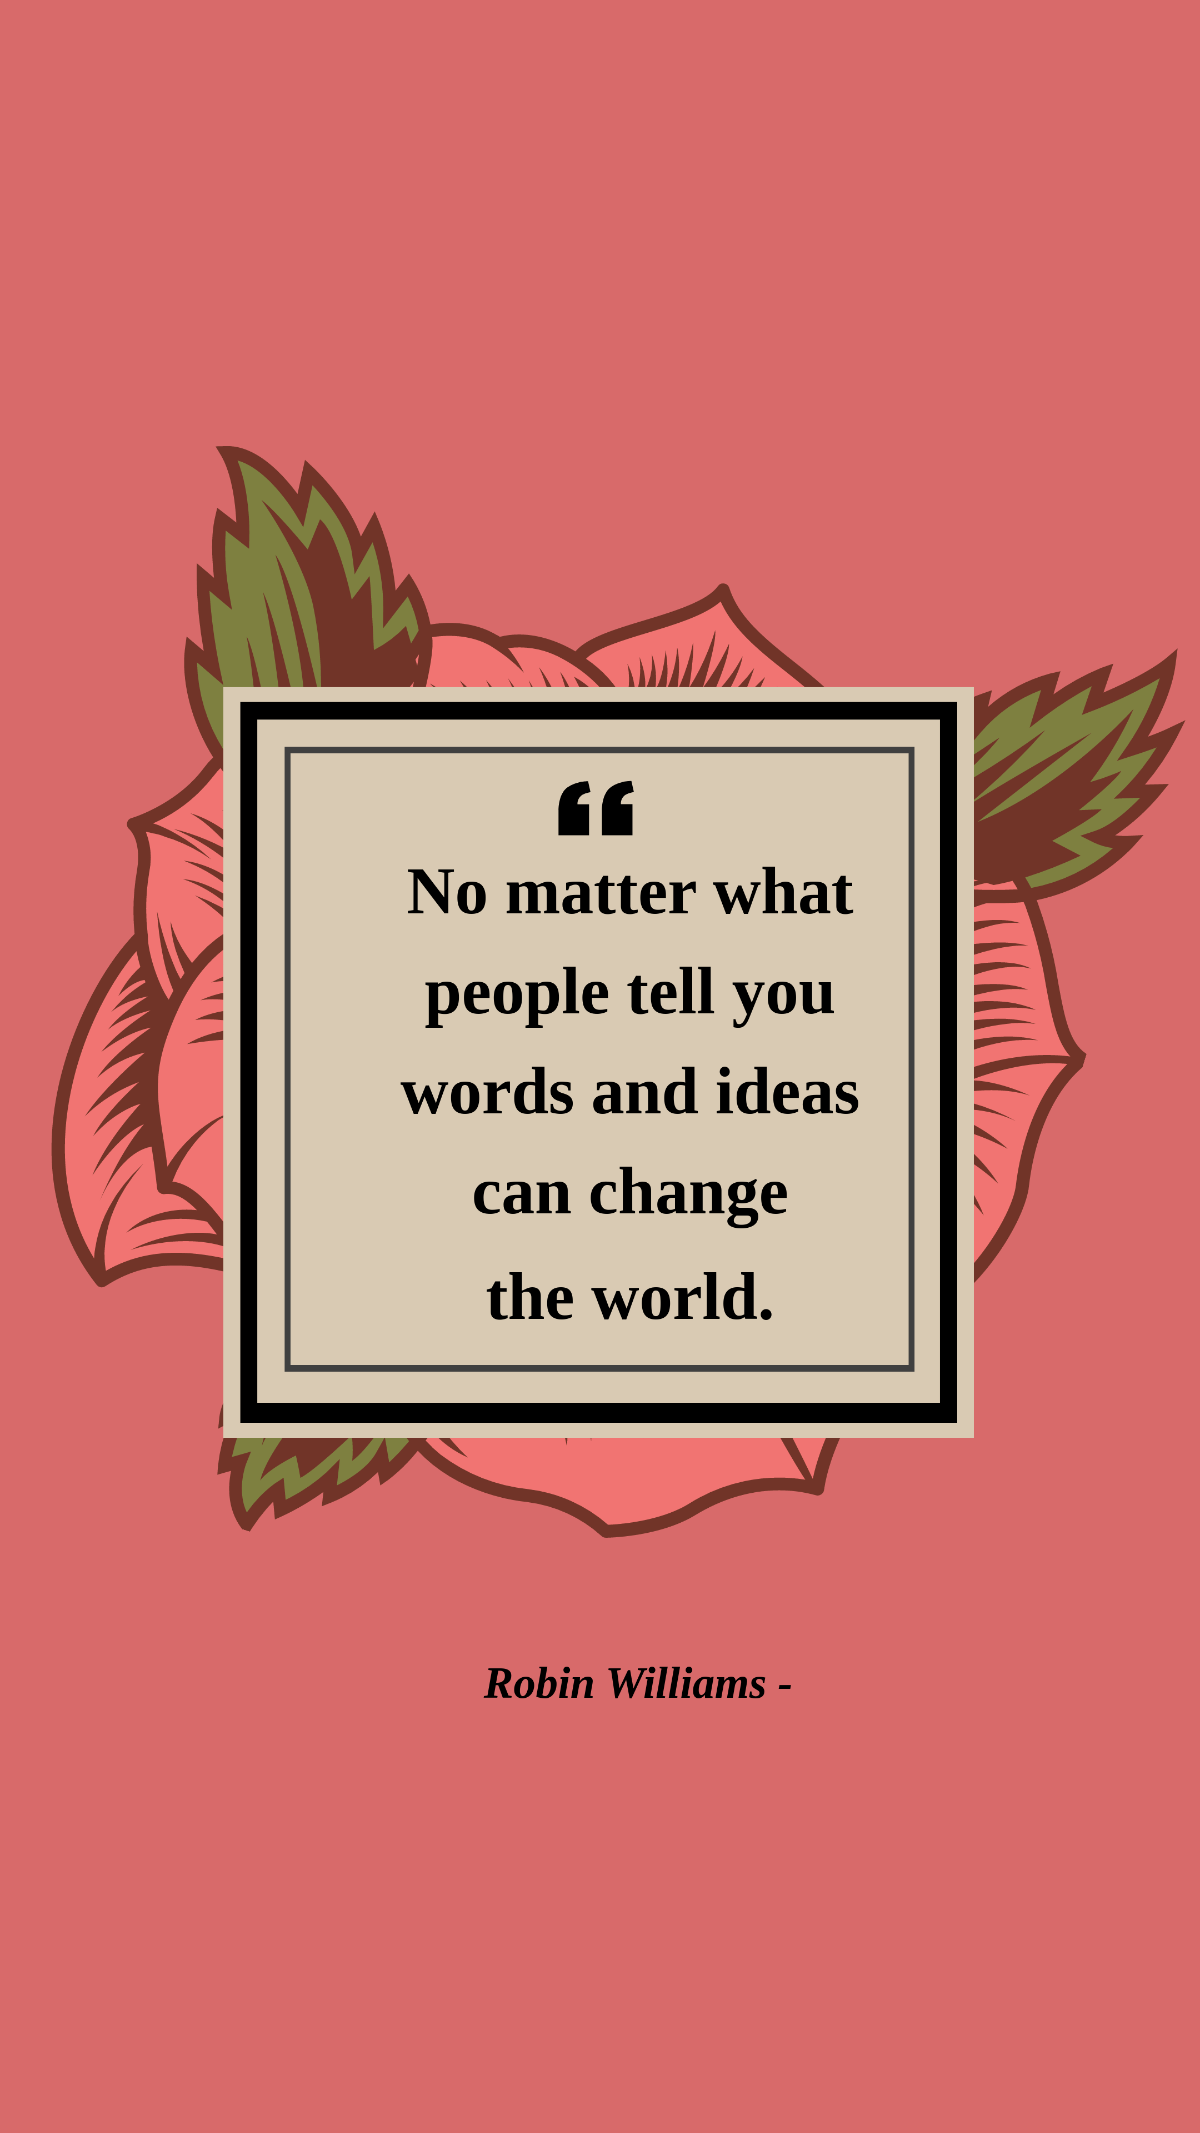 Robin Williams - No matter what people tell you words and ideas can change the world.